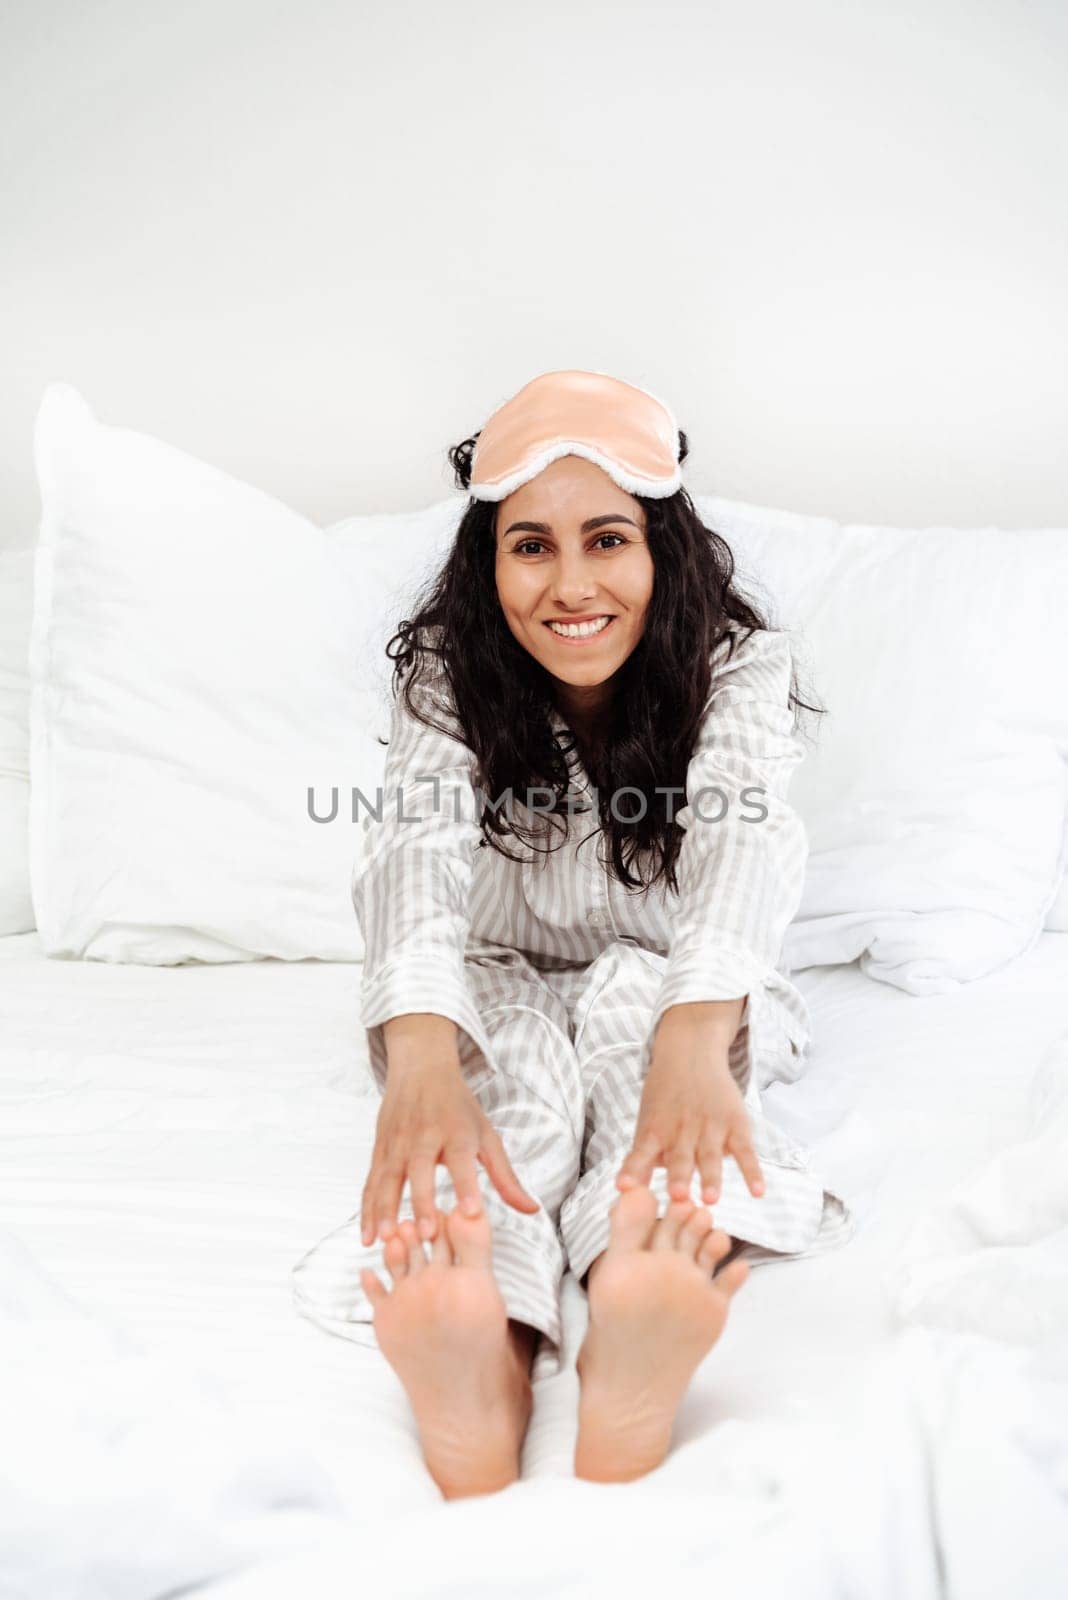 Young Hispanic woman waking up doing exercises. The girl in a pleasant atmosphere enjoys the morning rituals. The hands reach for the feet, she succeeds and this gives her strength and energy